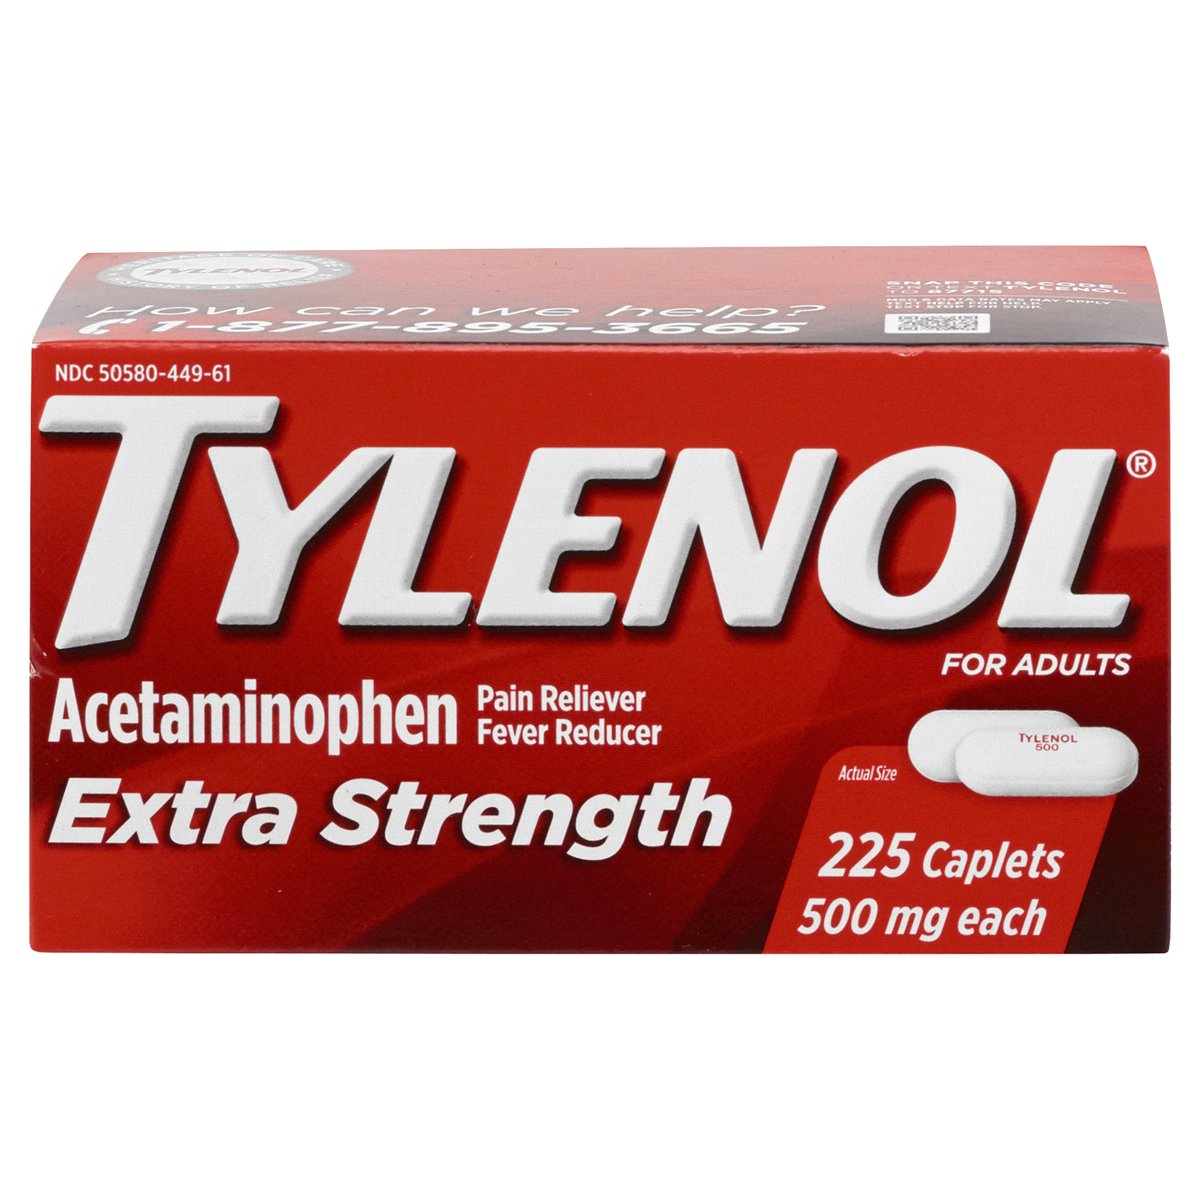 Acetaminophen dosing, even though it debuted in the 1950s, is another relic. Regular Tylenol=325mg=5grains. “Extra strength” branded Tylenol may be 500 mg, but 325-650 mg doses (i.e., 5-10 grains) are sold commonly. Weird that 650 mg is not “extra strength” but 500 mg is…/54